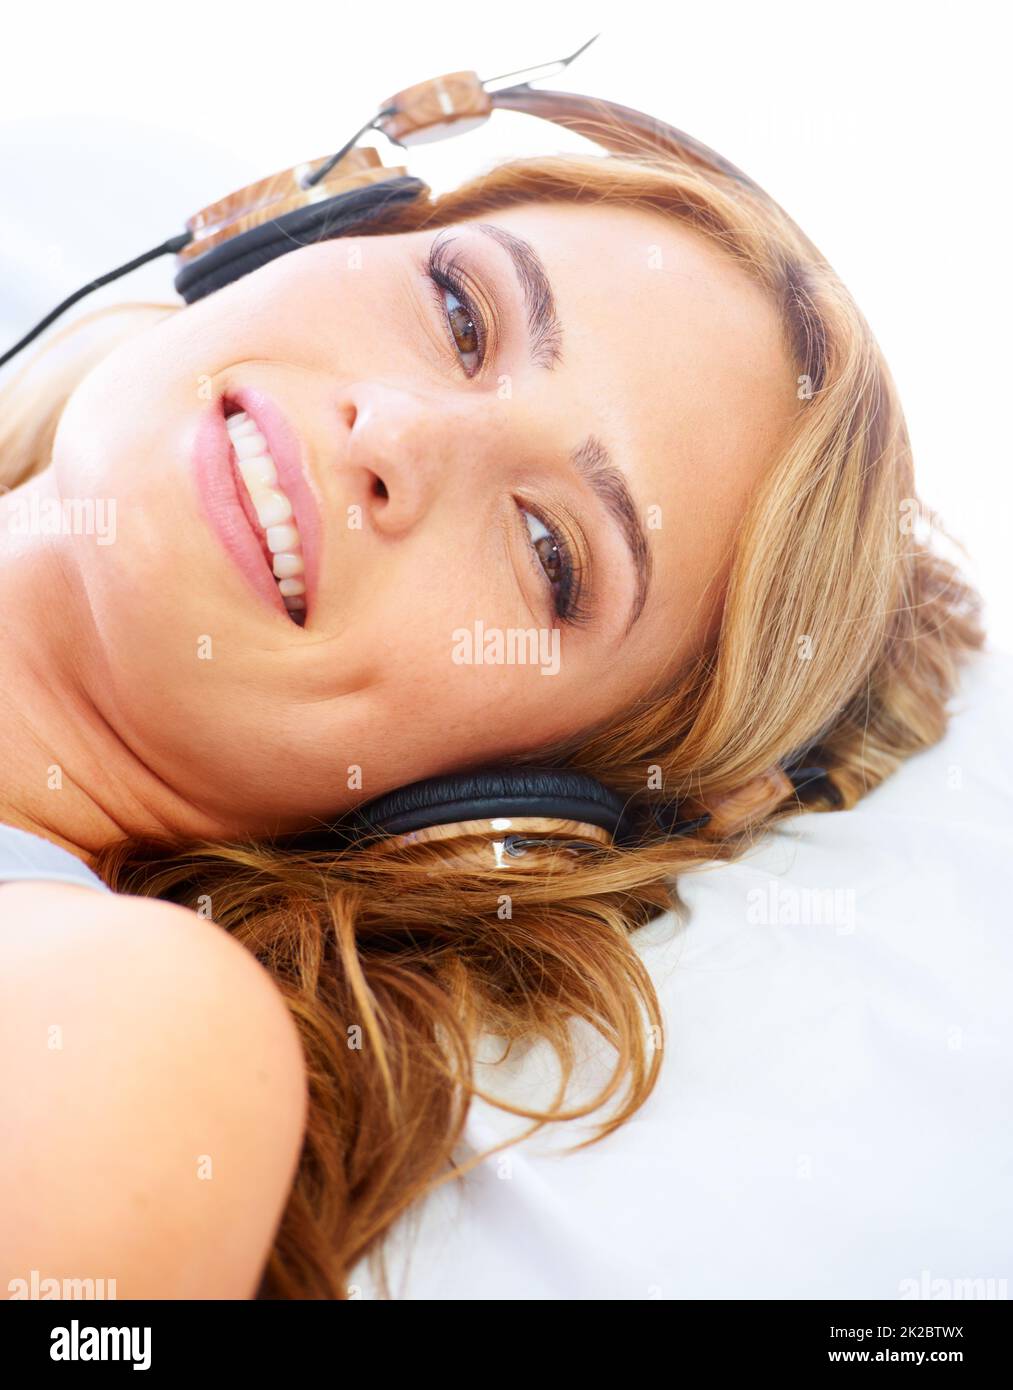 Relaxing with some great sounds. Young woman listening to music while wearing a pair of headphones and smiling. Stock Photo